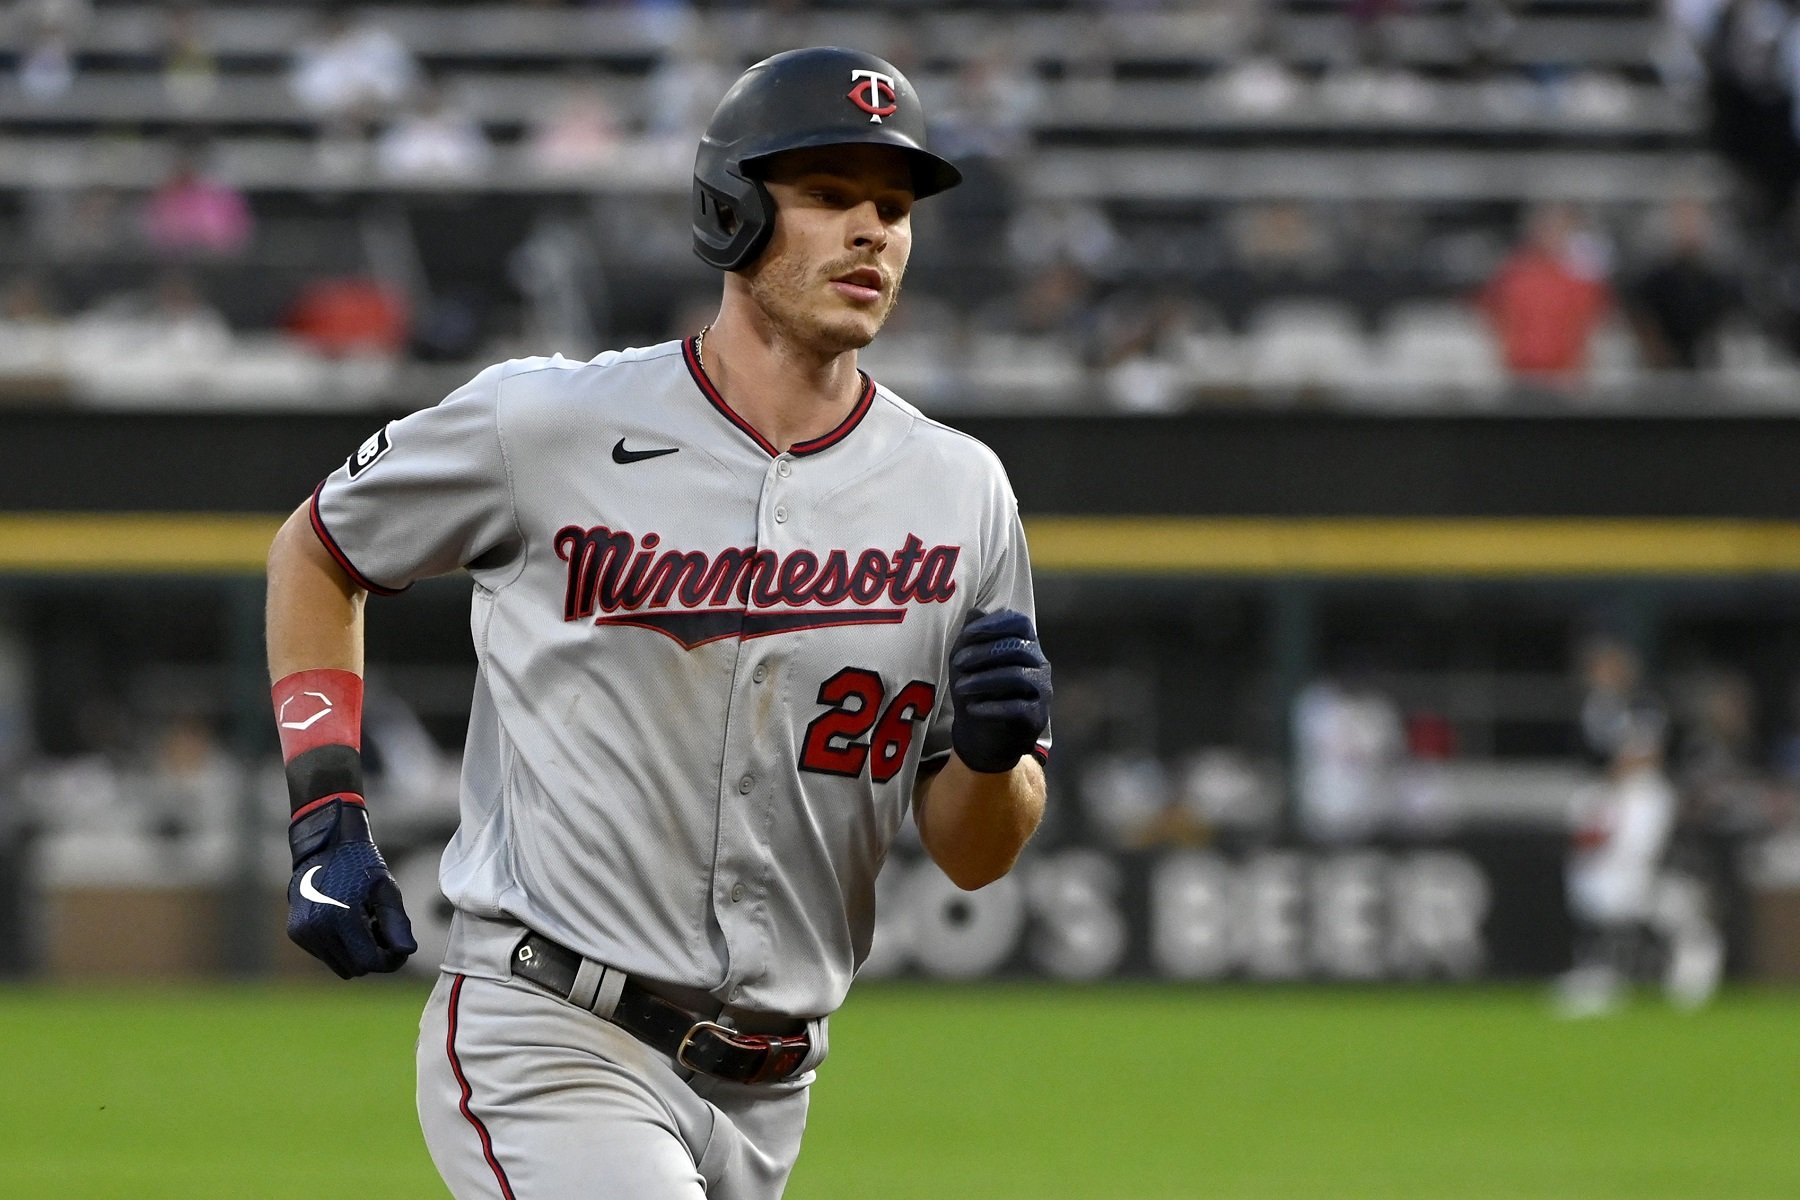 Twins' Max Kepler got coolest double of MLB season after tripping